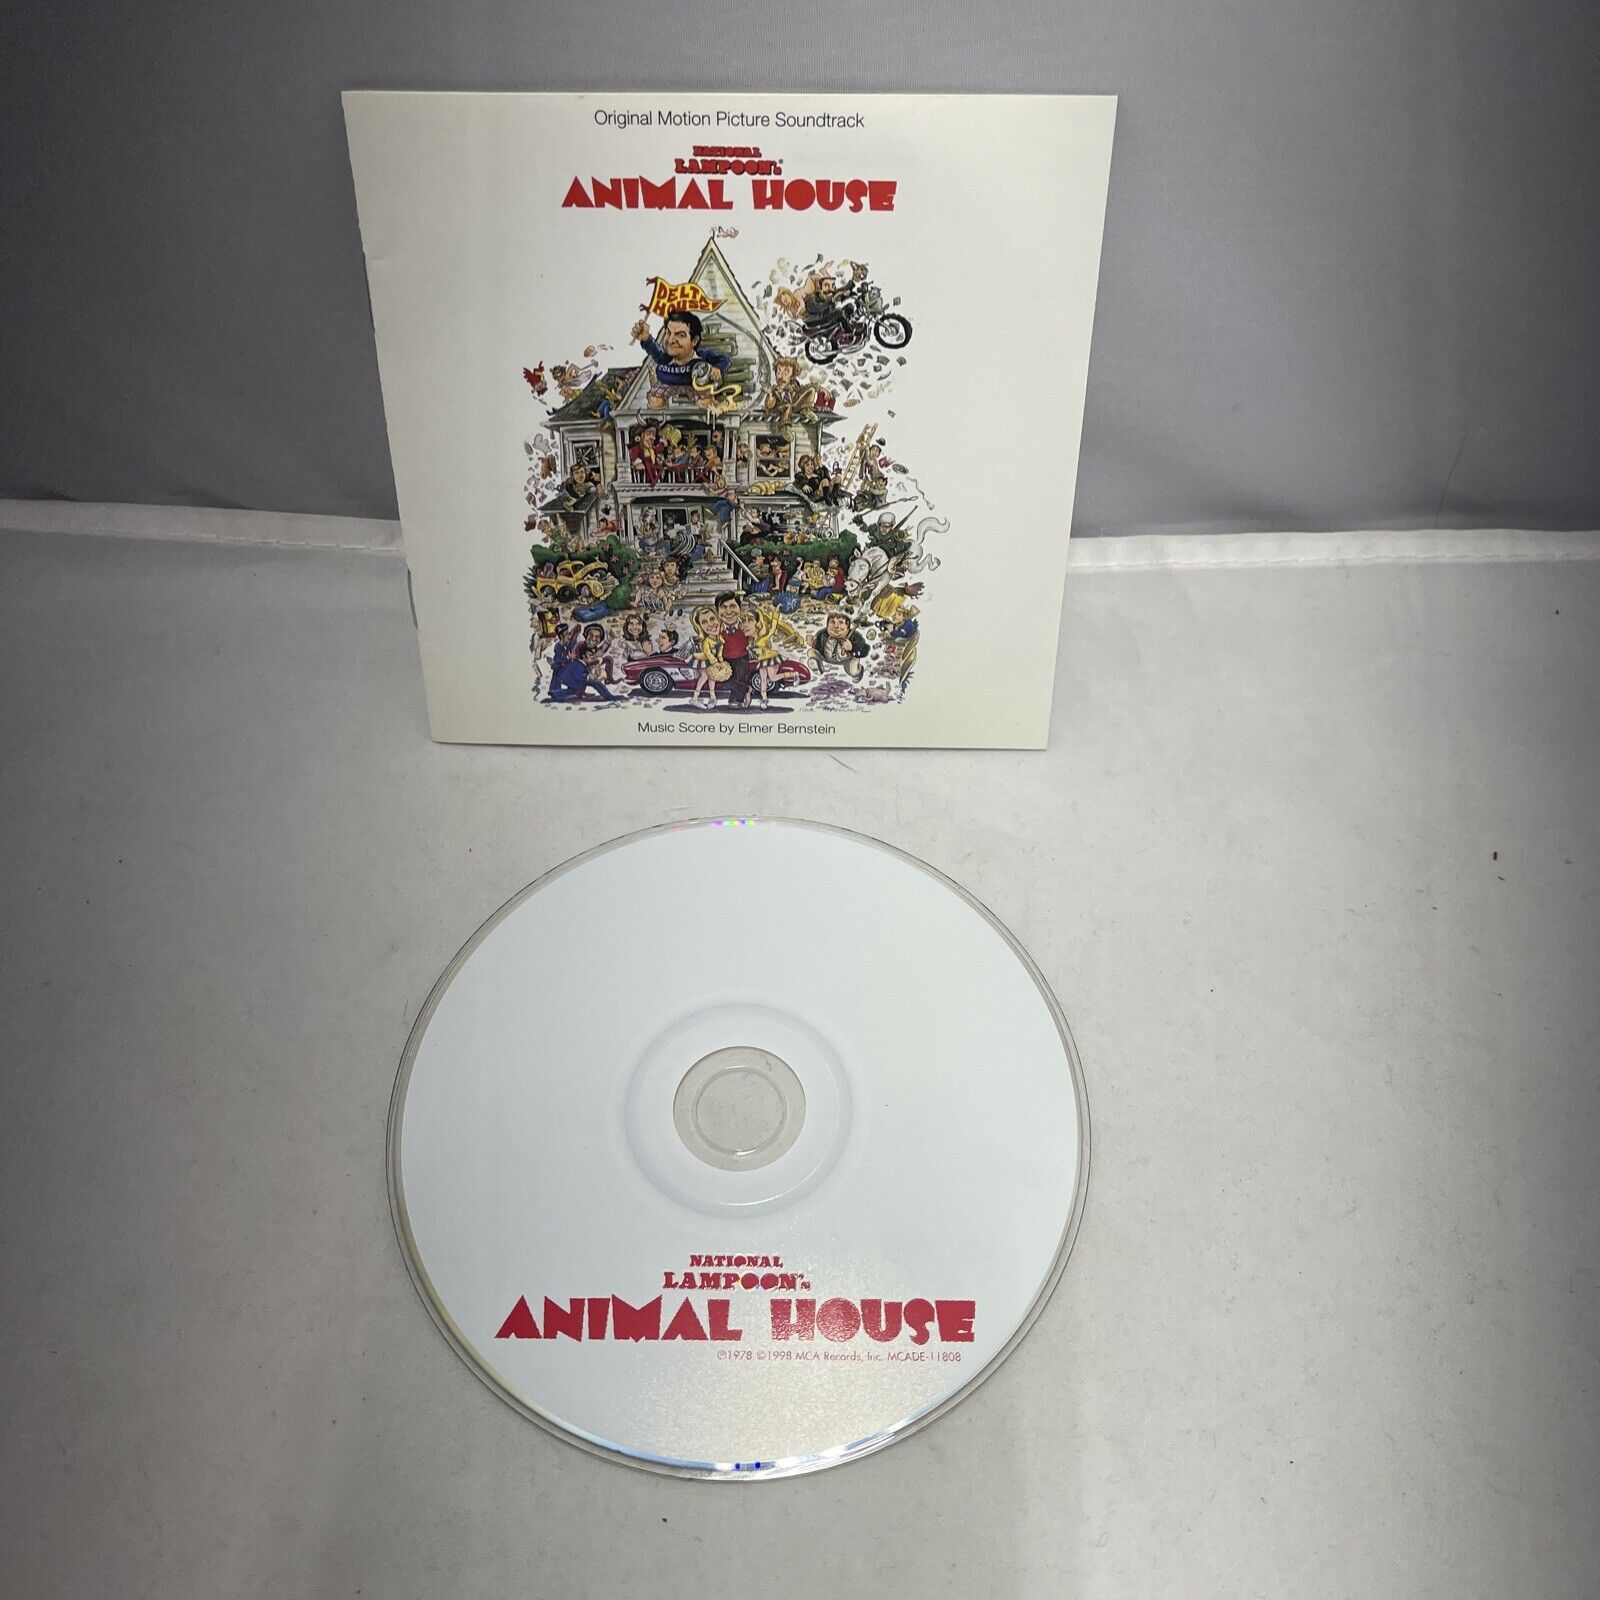 NATIONAL LAMPOON'S ANIMAL HOUSE SOUNDTRACK Cd Booklet & Cd Only LOUIE,  LOUIE ++ | eBay